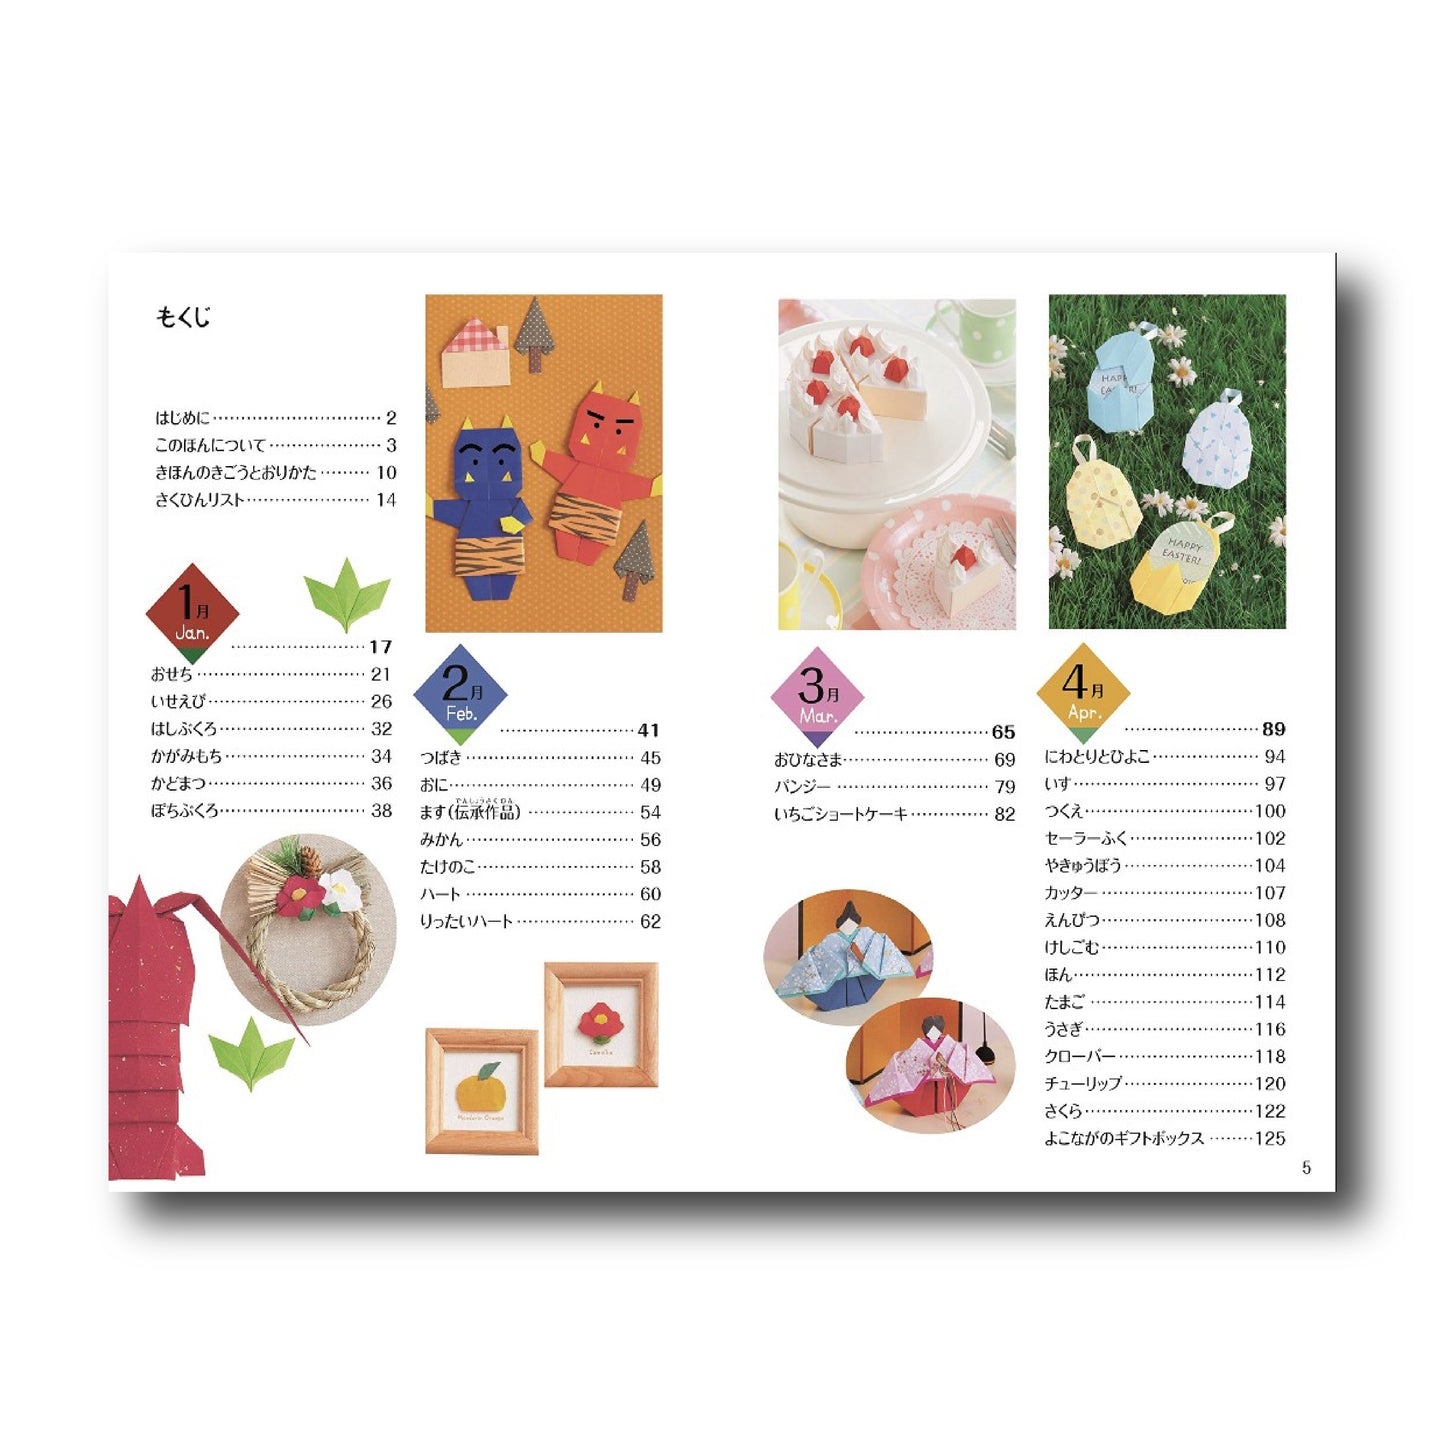 Definitive Edition! Japanese Origami: 12 Months (Japanese Edition)